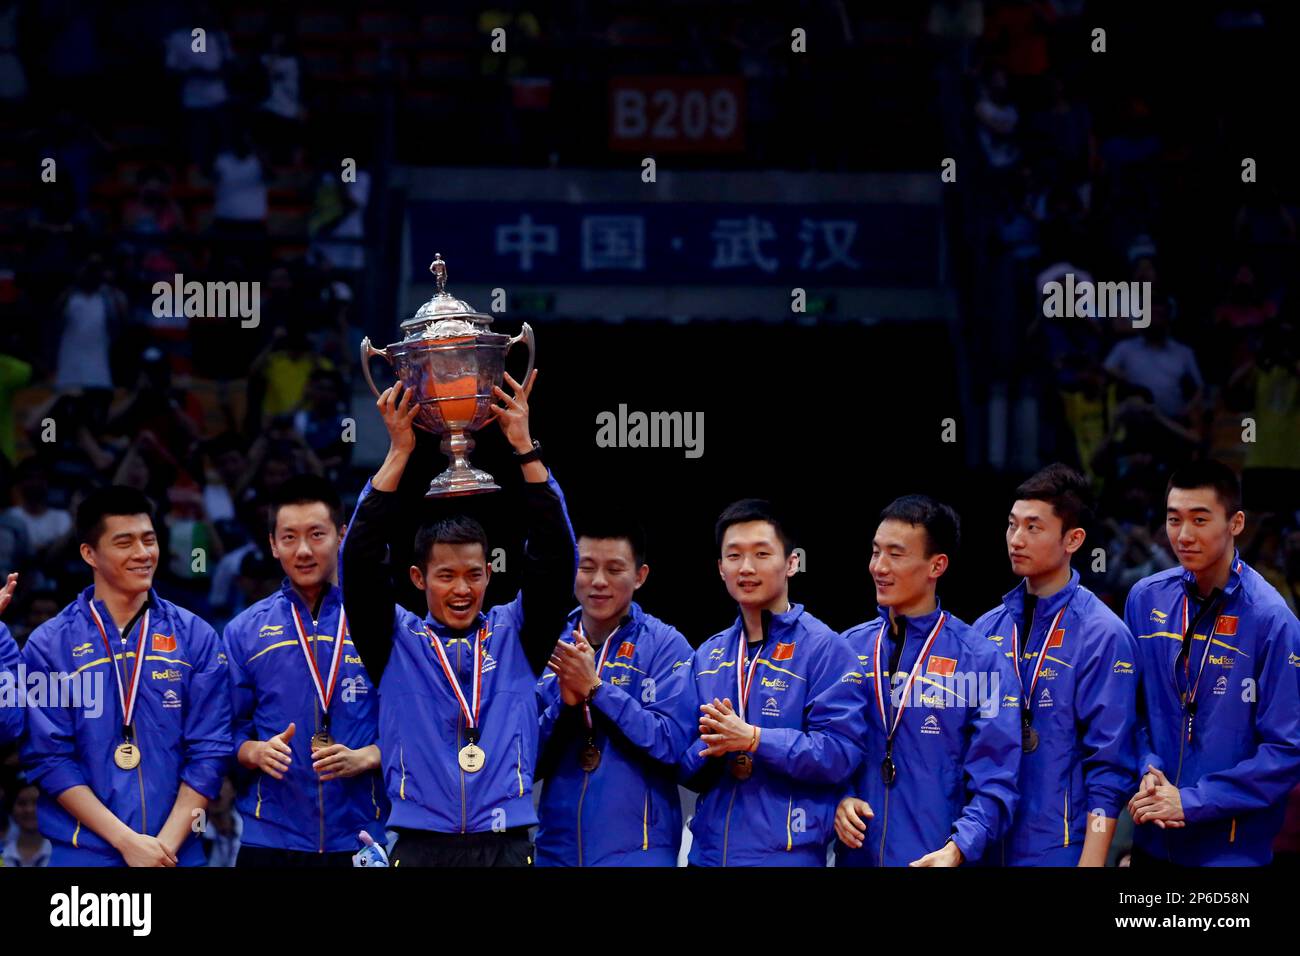 Chinese players celebrate with the trophy during the award ceremony of the Thomas Cup badminton championship in Wuhan in central Chinas Hubei province on Sunday, May 27, 2012